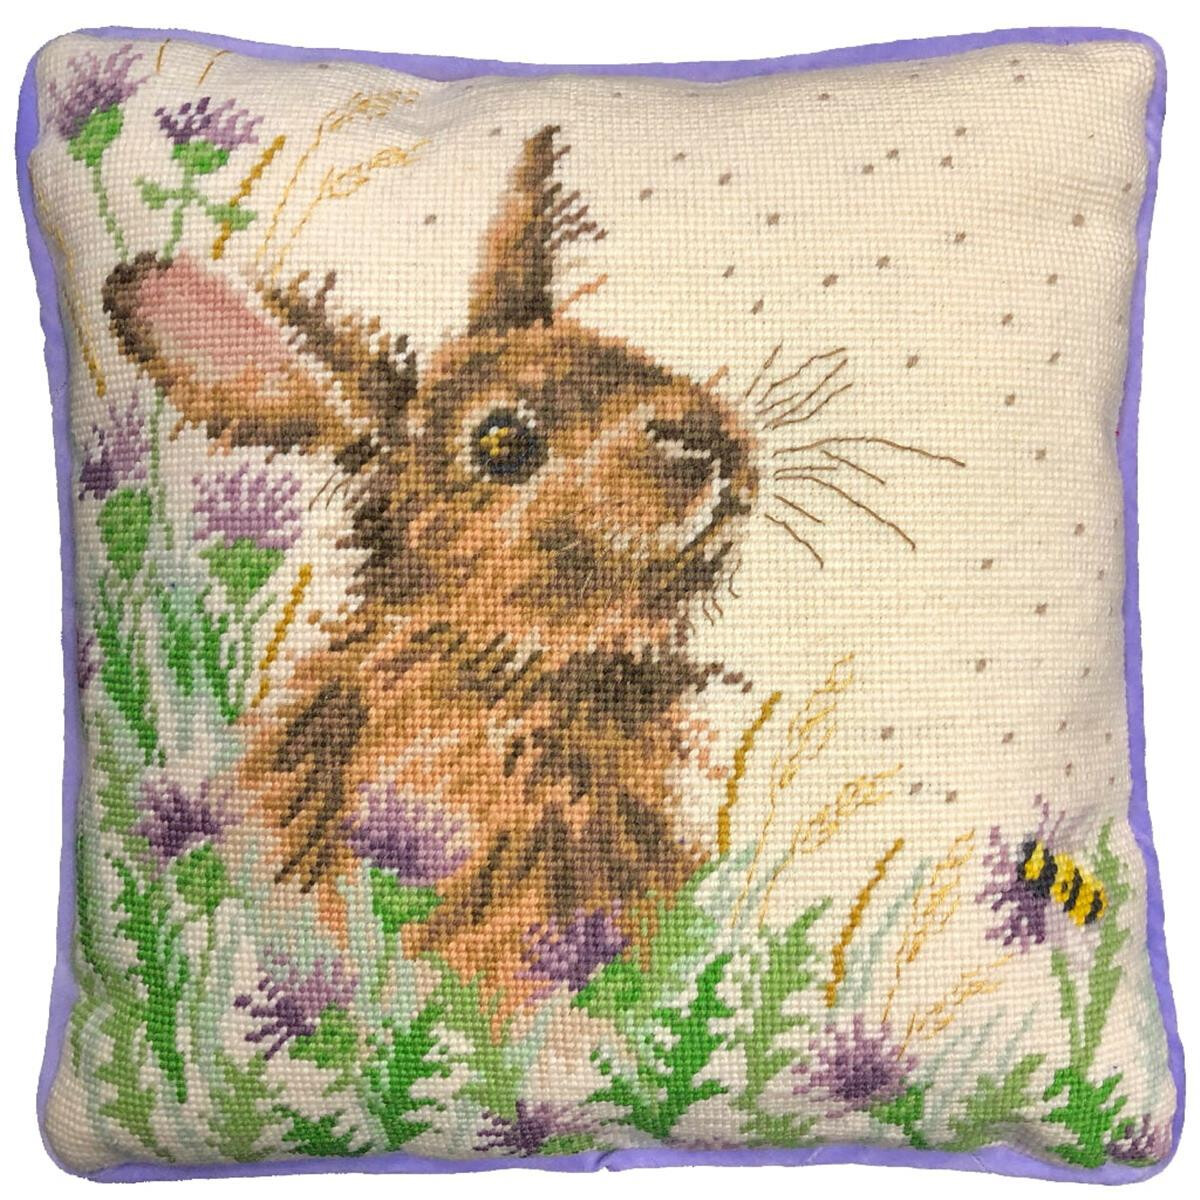 A square cushion with a hand-stitched cross-stitch...